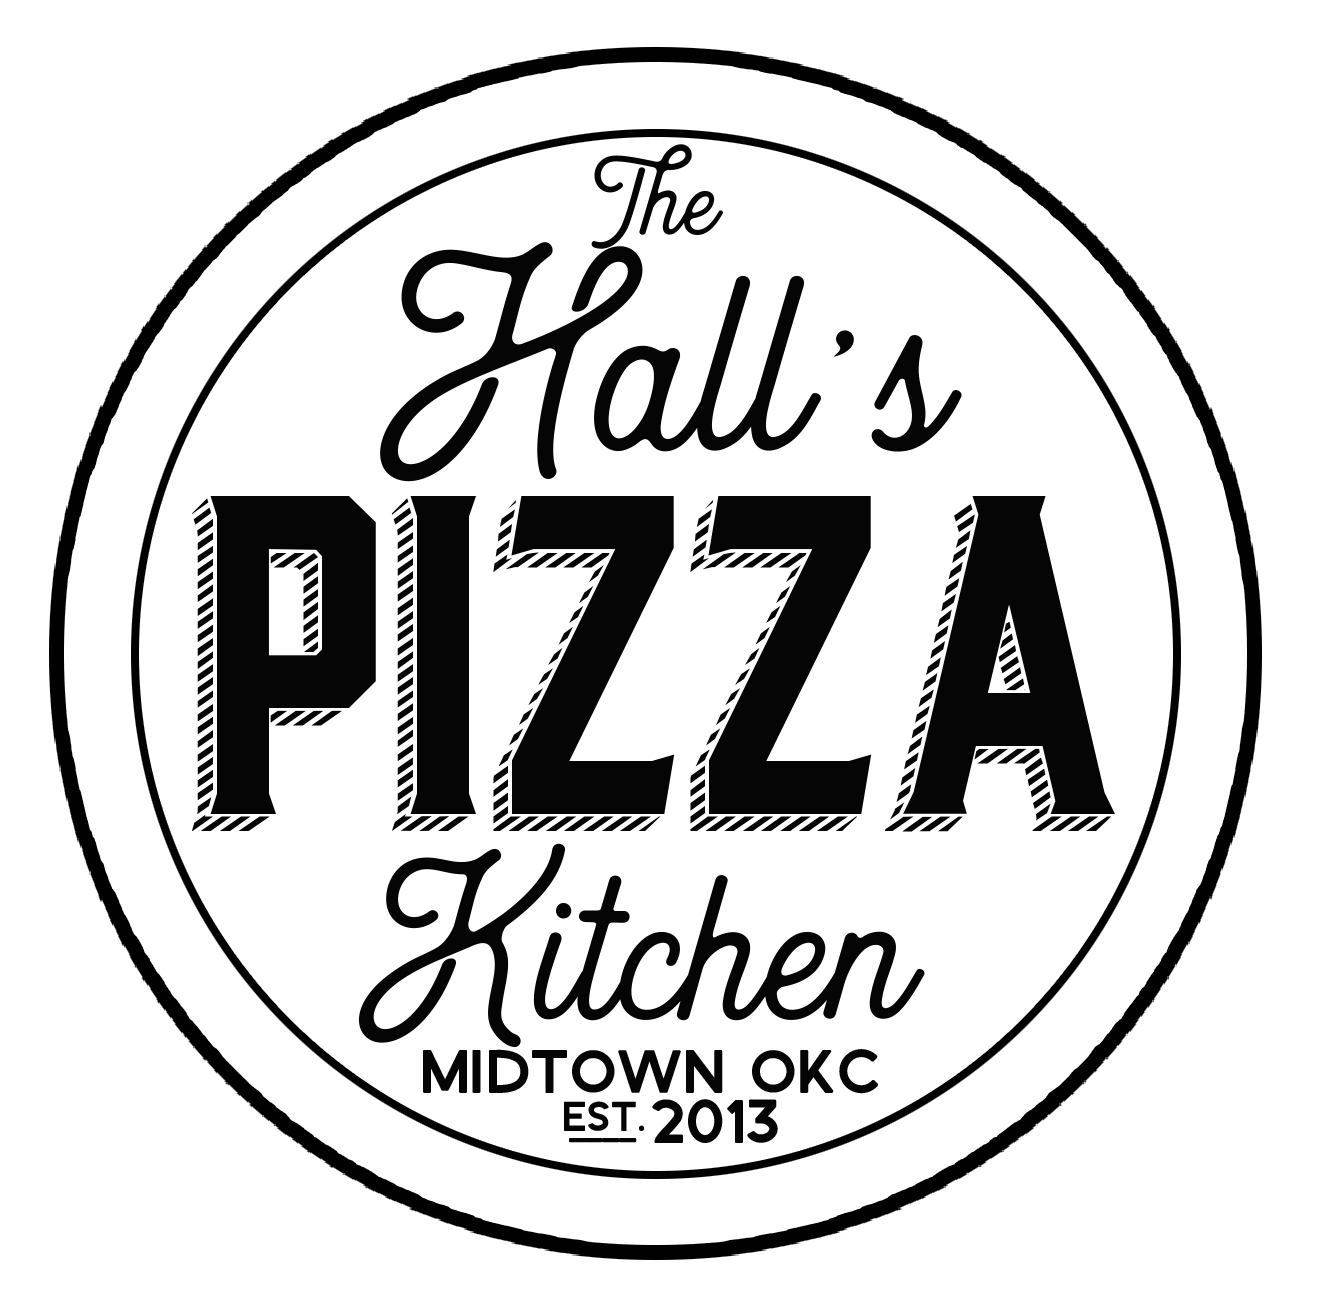 The Hall's Pizza Kitchen